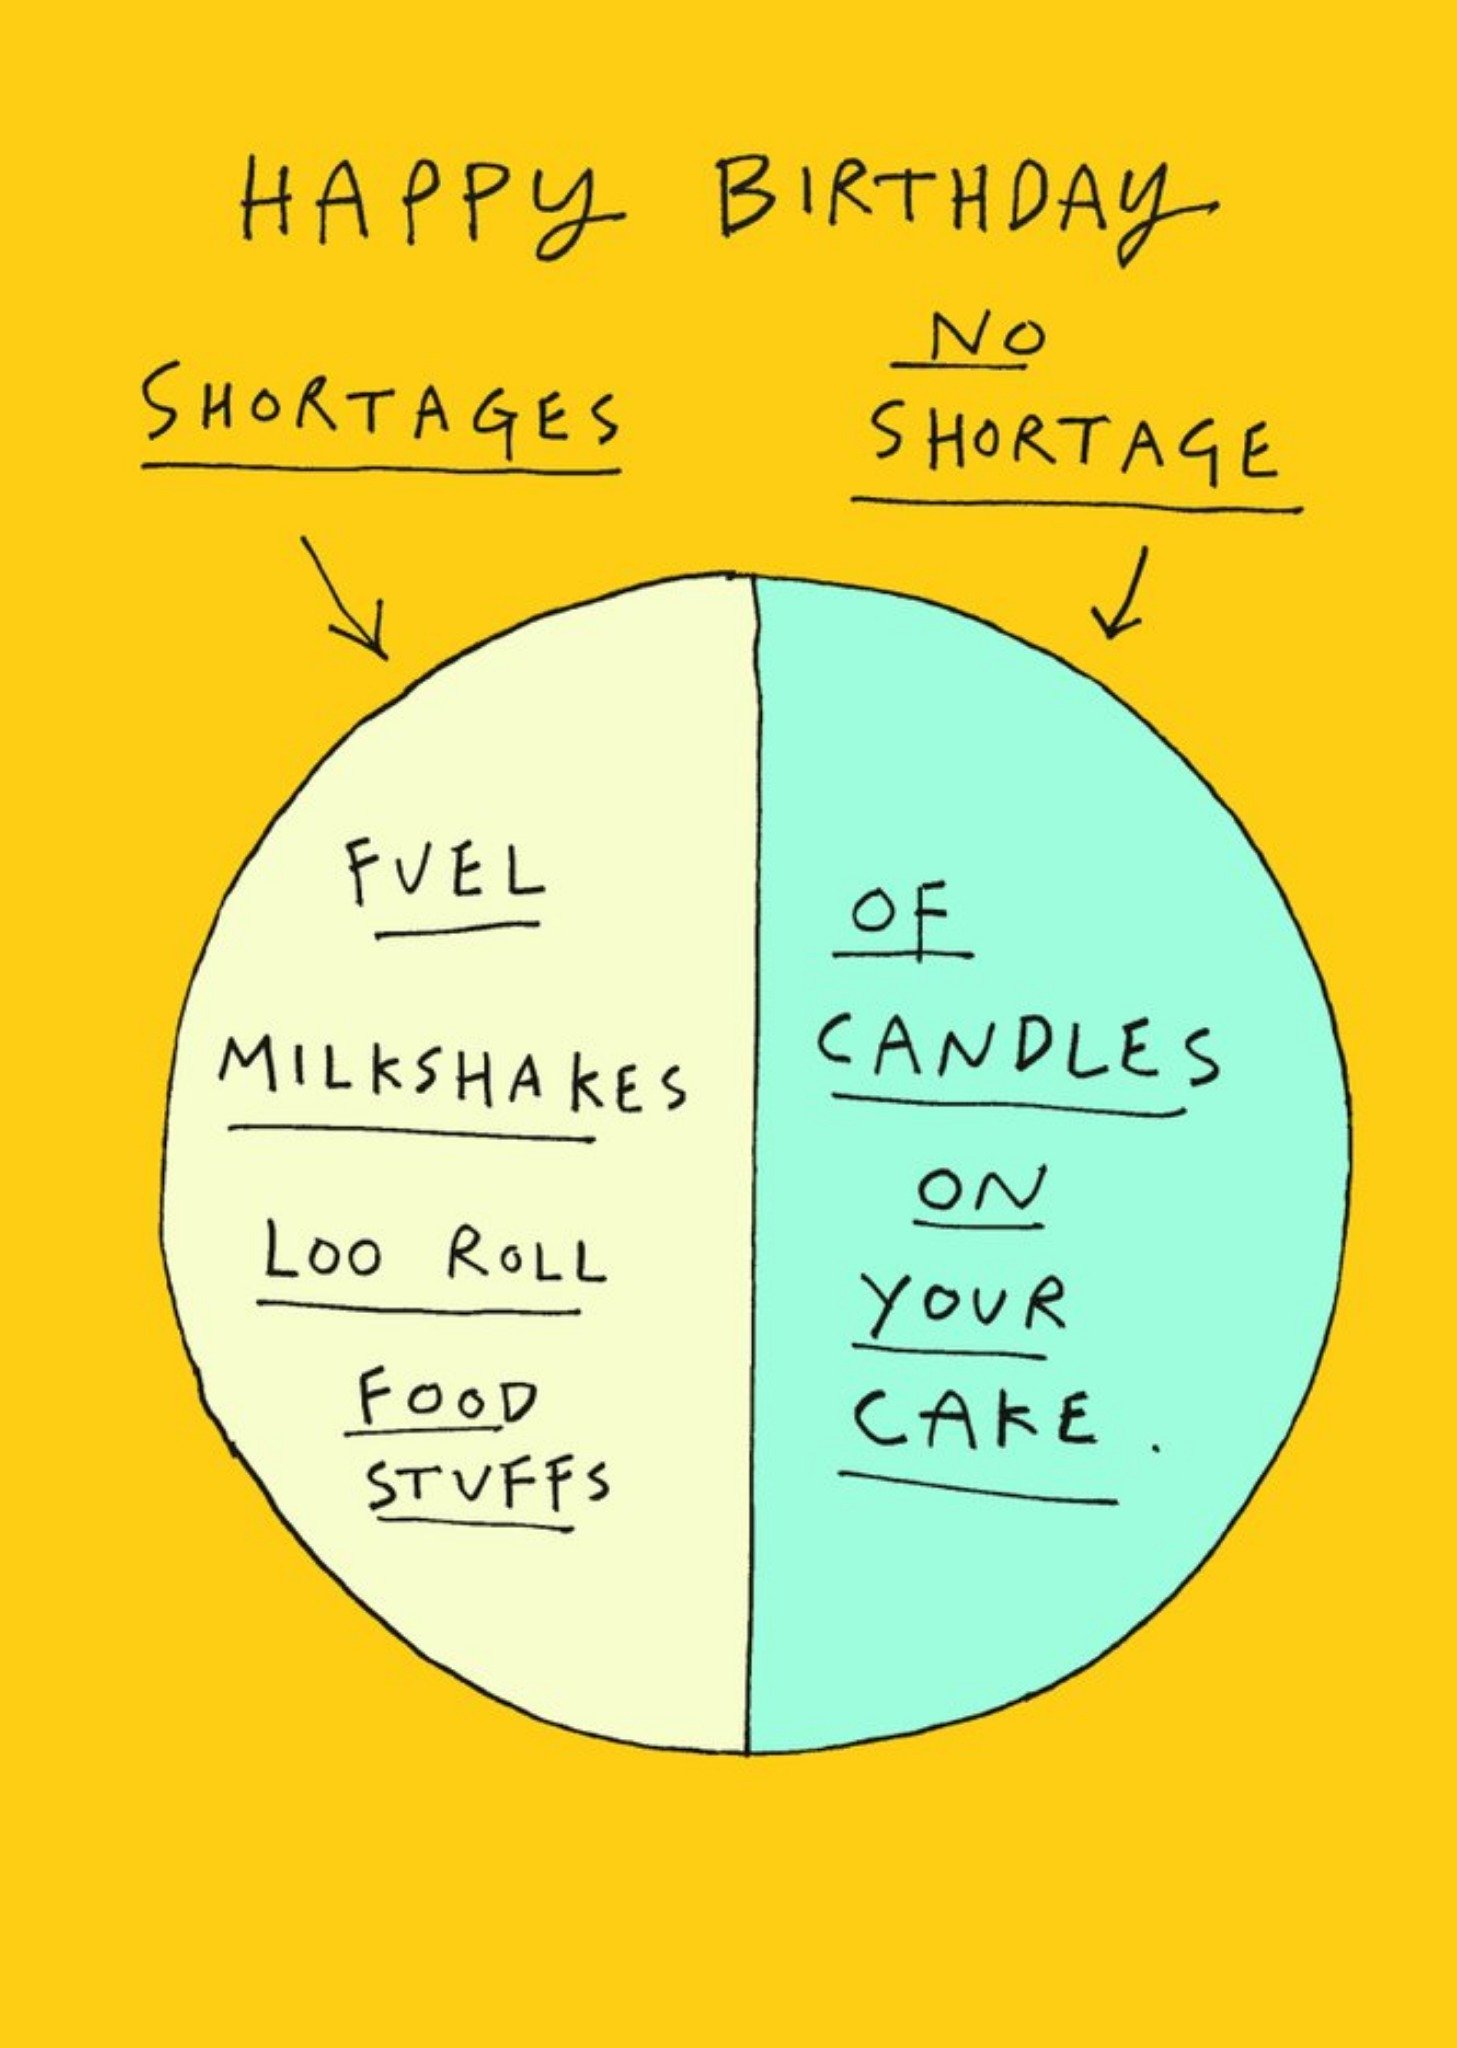 Moonpig Funny Topical Birthday Shortages Pie Chart Card Ecard